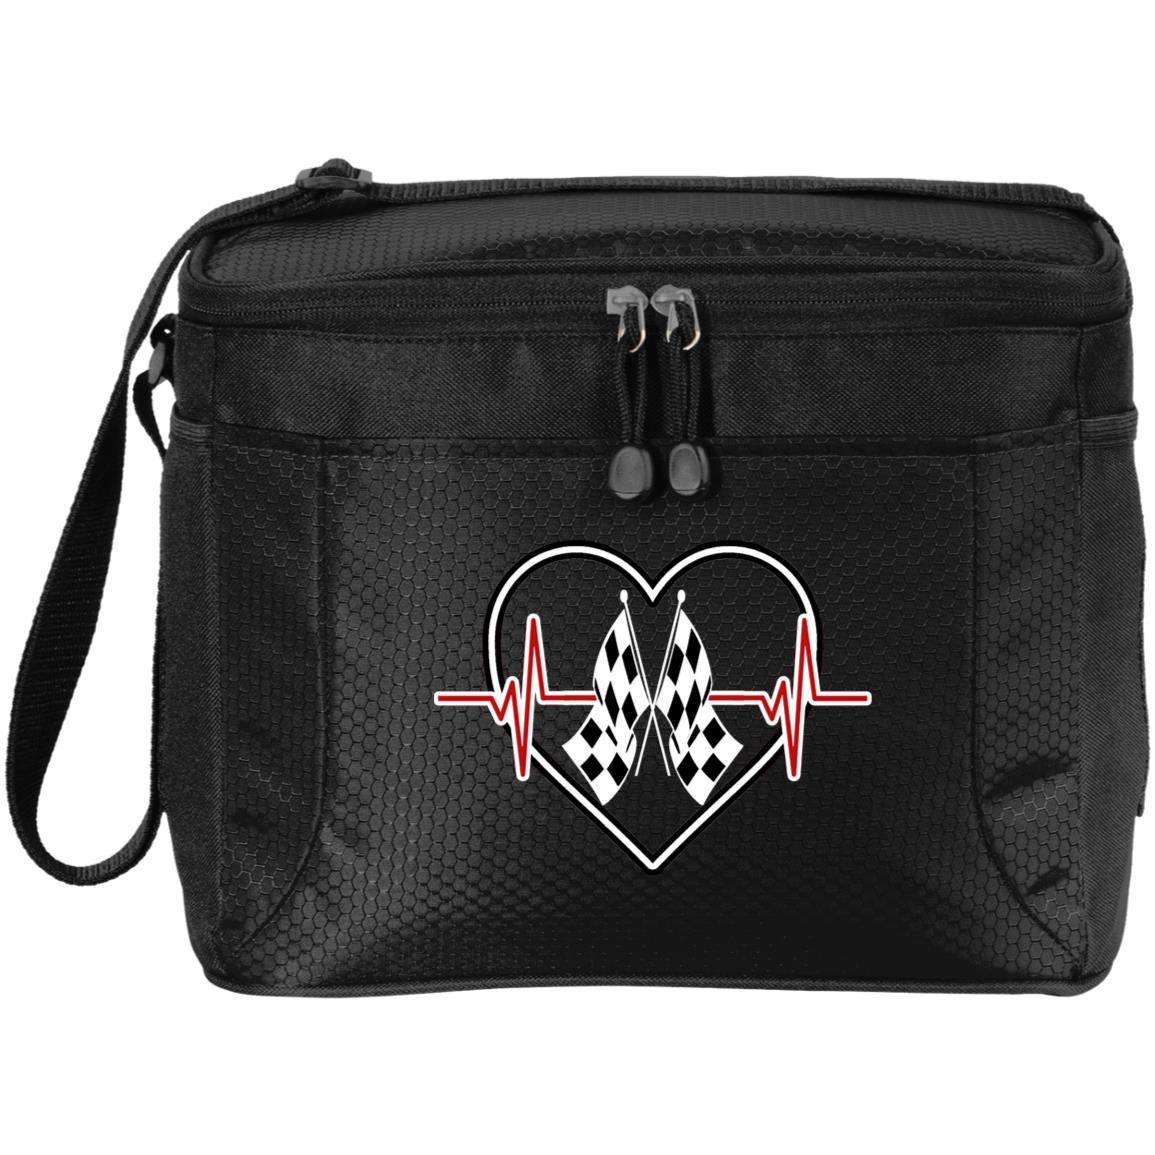 Racing Heartbeat 12-Pack Cooler